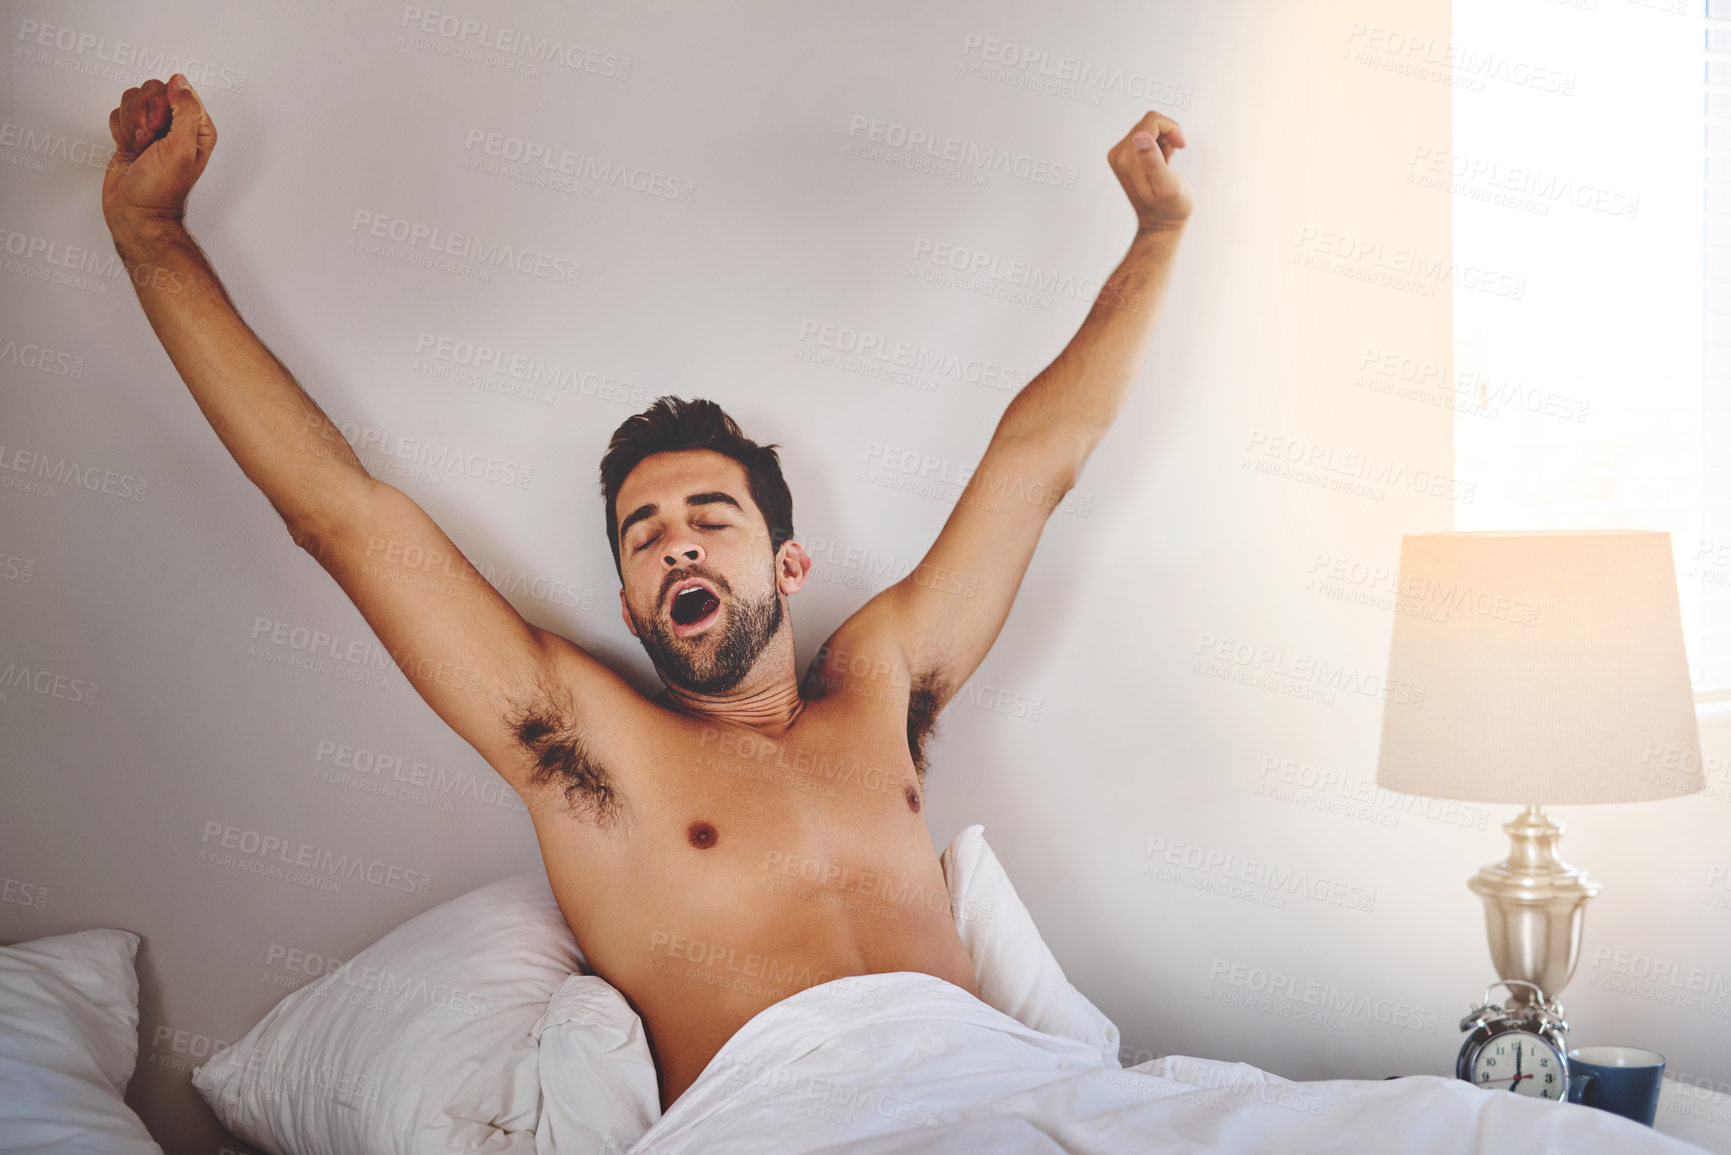 Buy stock photo Cropped shot of a handsome young man stretching while waking up in his bedroom at home